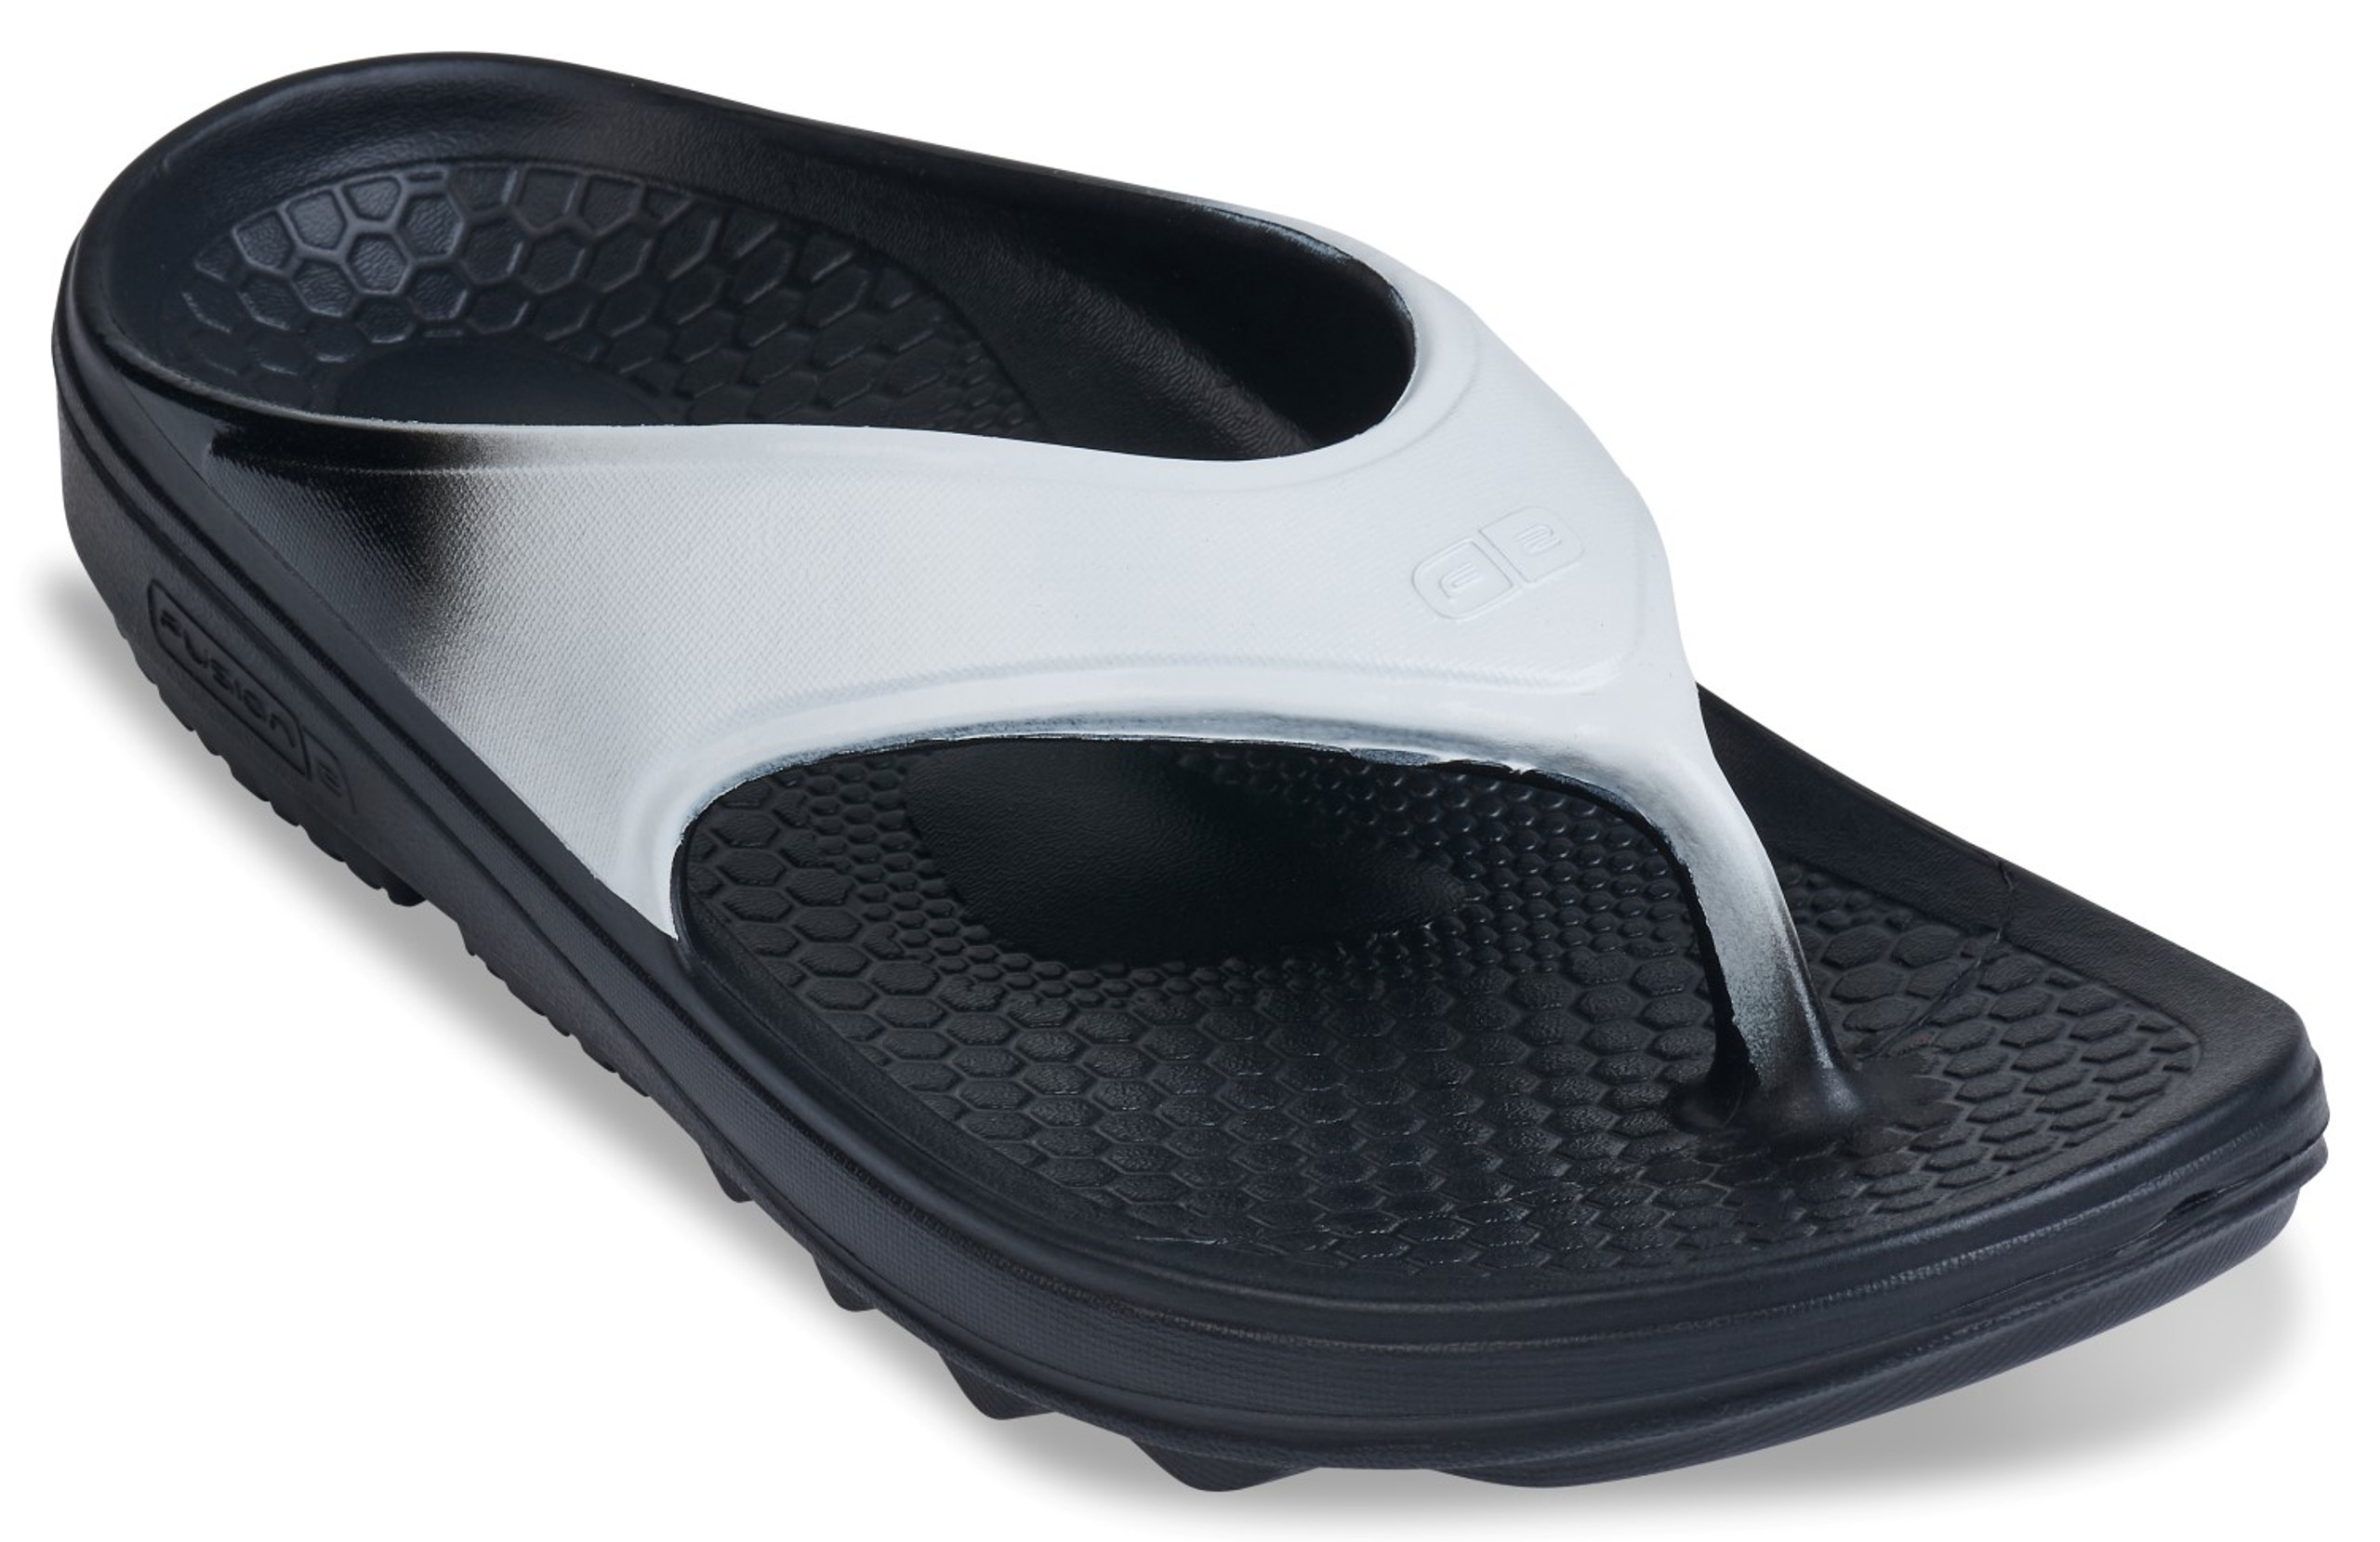 Spenco Fusion 2 Fade - Women's Recovery Sandal - Free Shipping